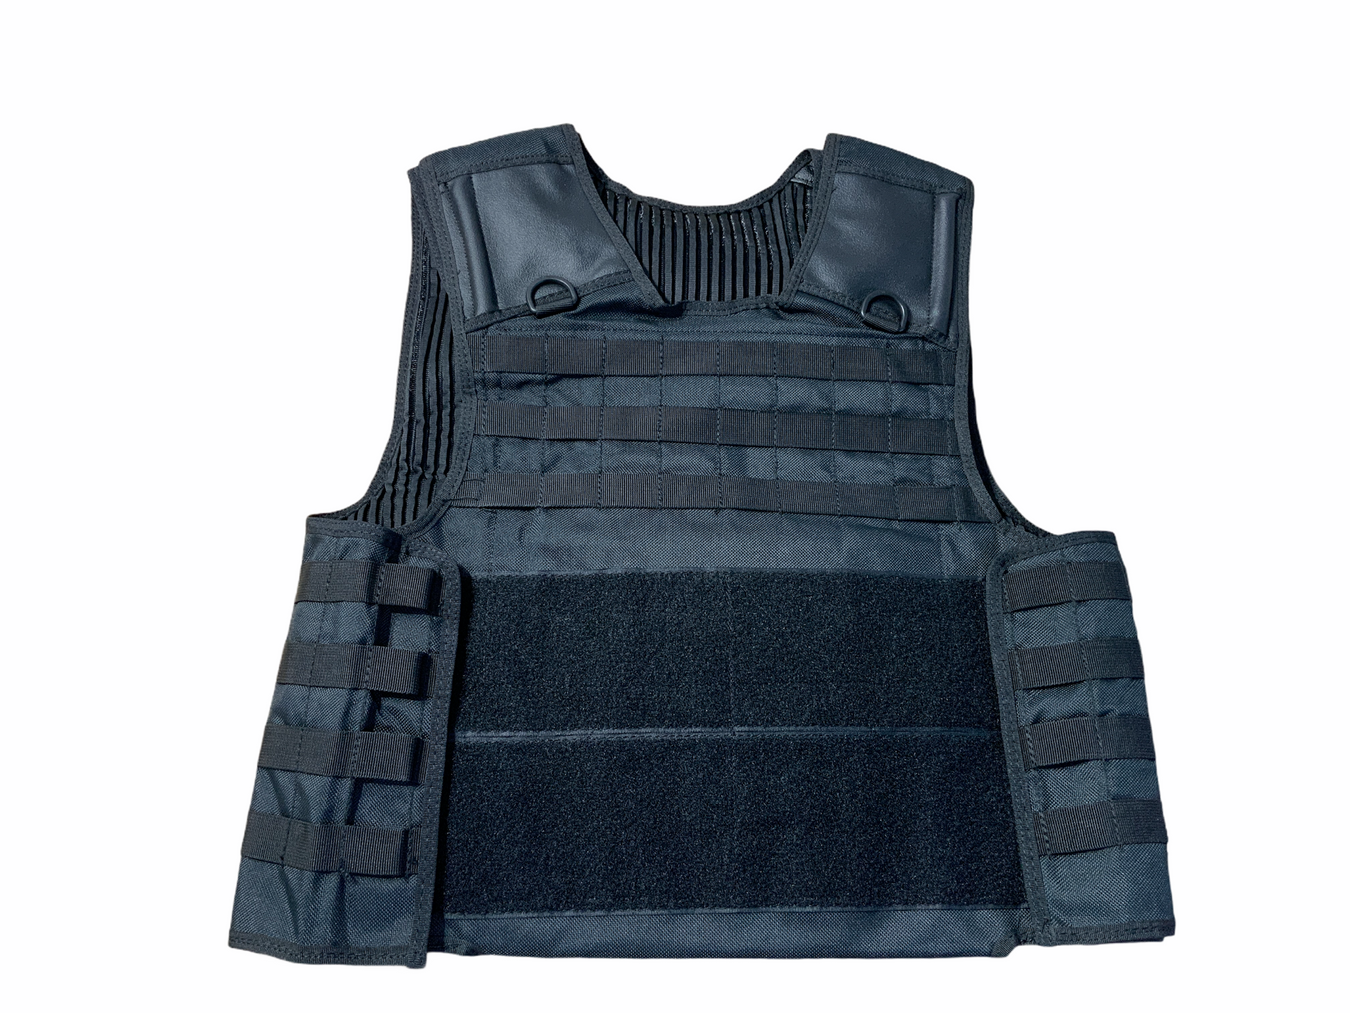 Body Armour Covers